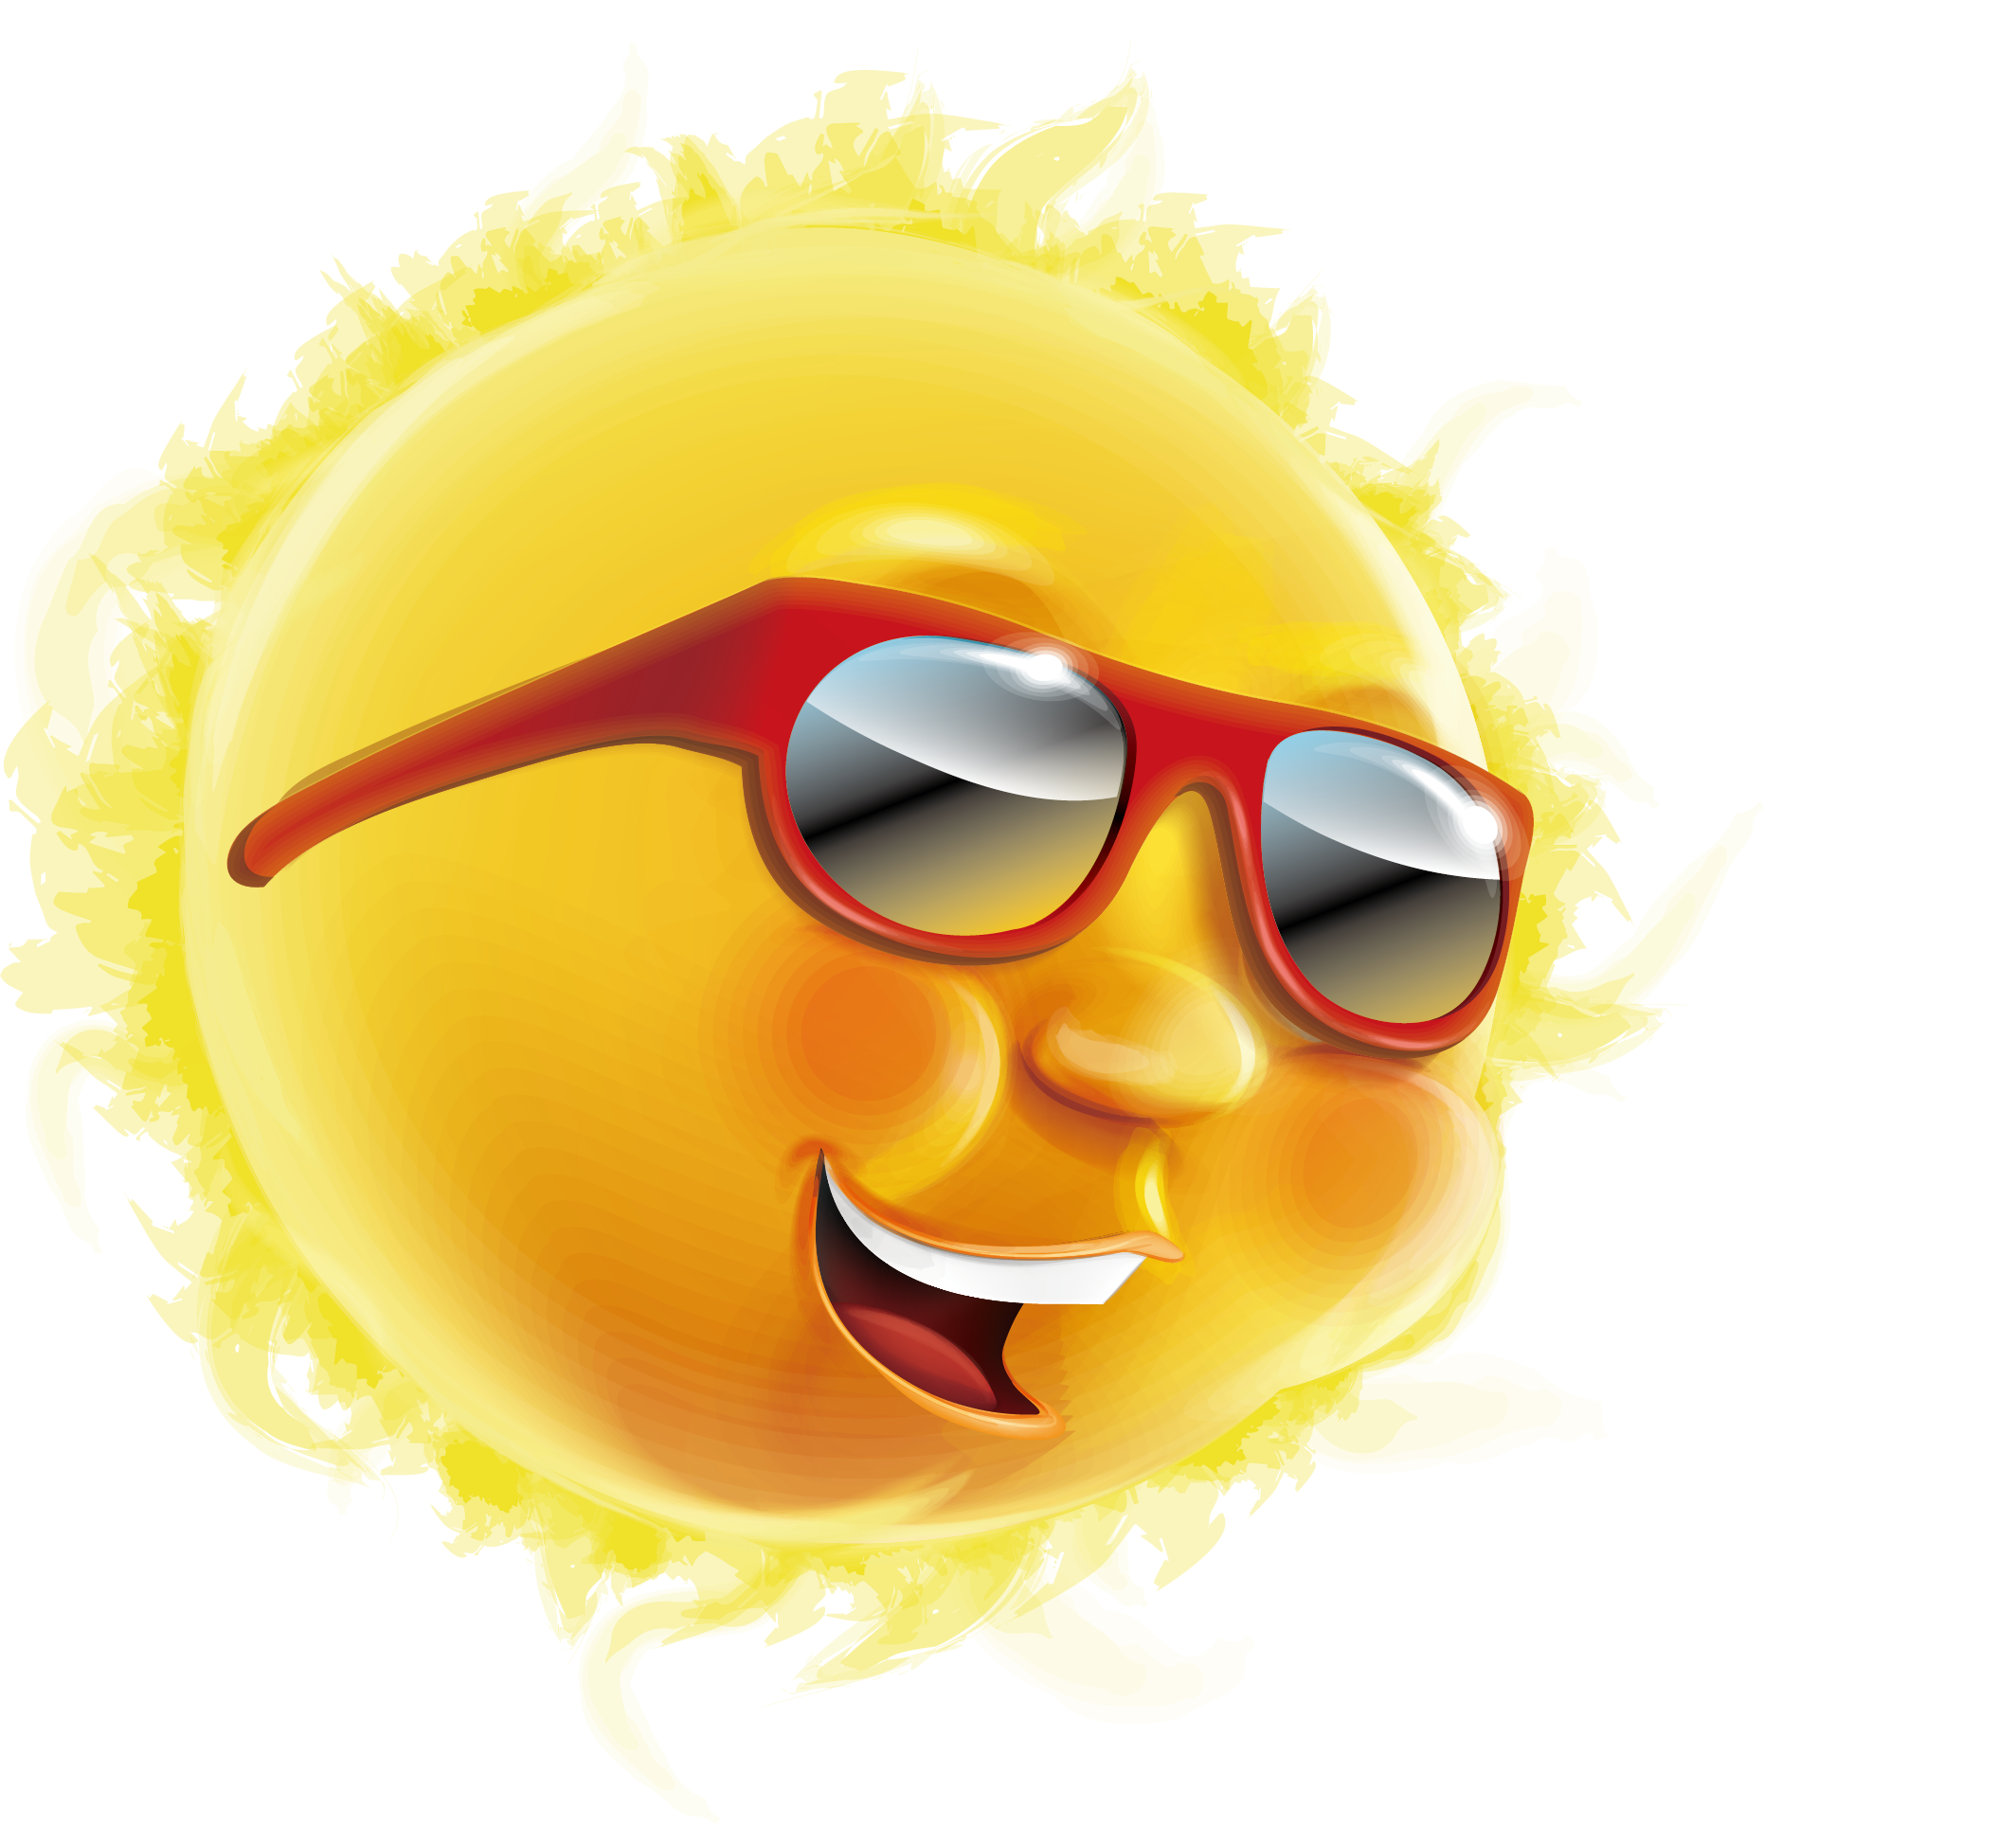 Wearing Sun Sunglasses PNG Image High Quality Clipart